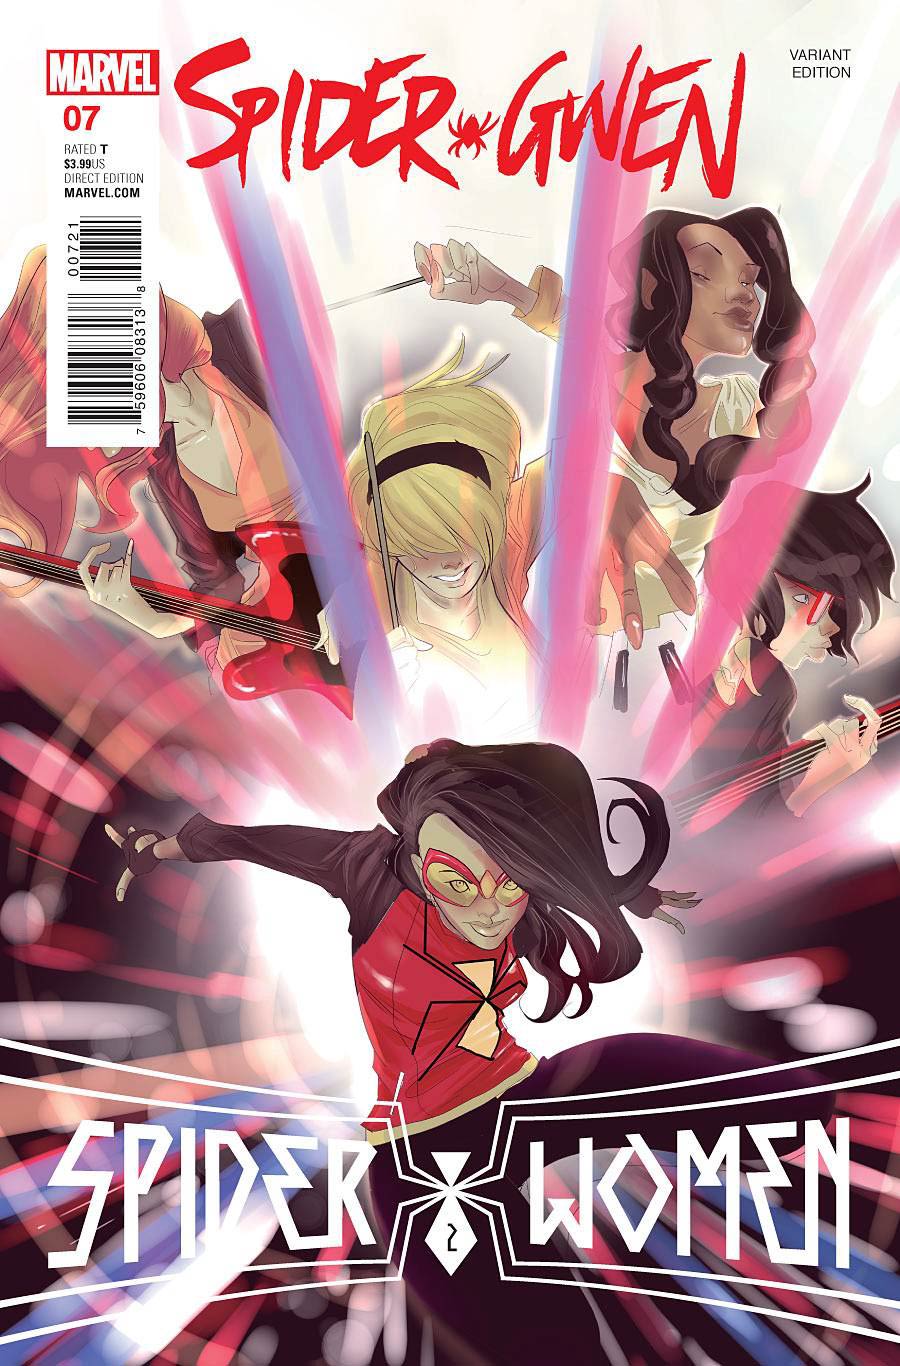 Spider-Gwen Vol 2 #7 Cover E Incentive Robbi Rodriguez Variant Cover (Spider-Women Part 2)